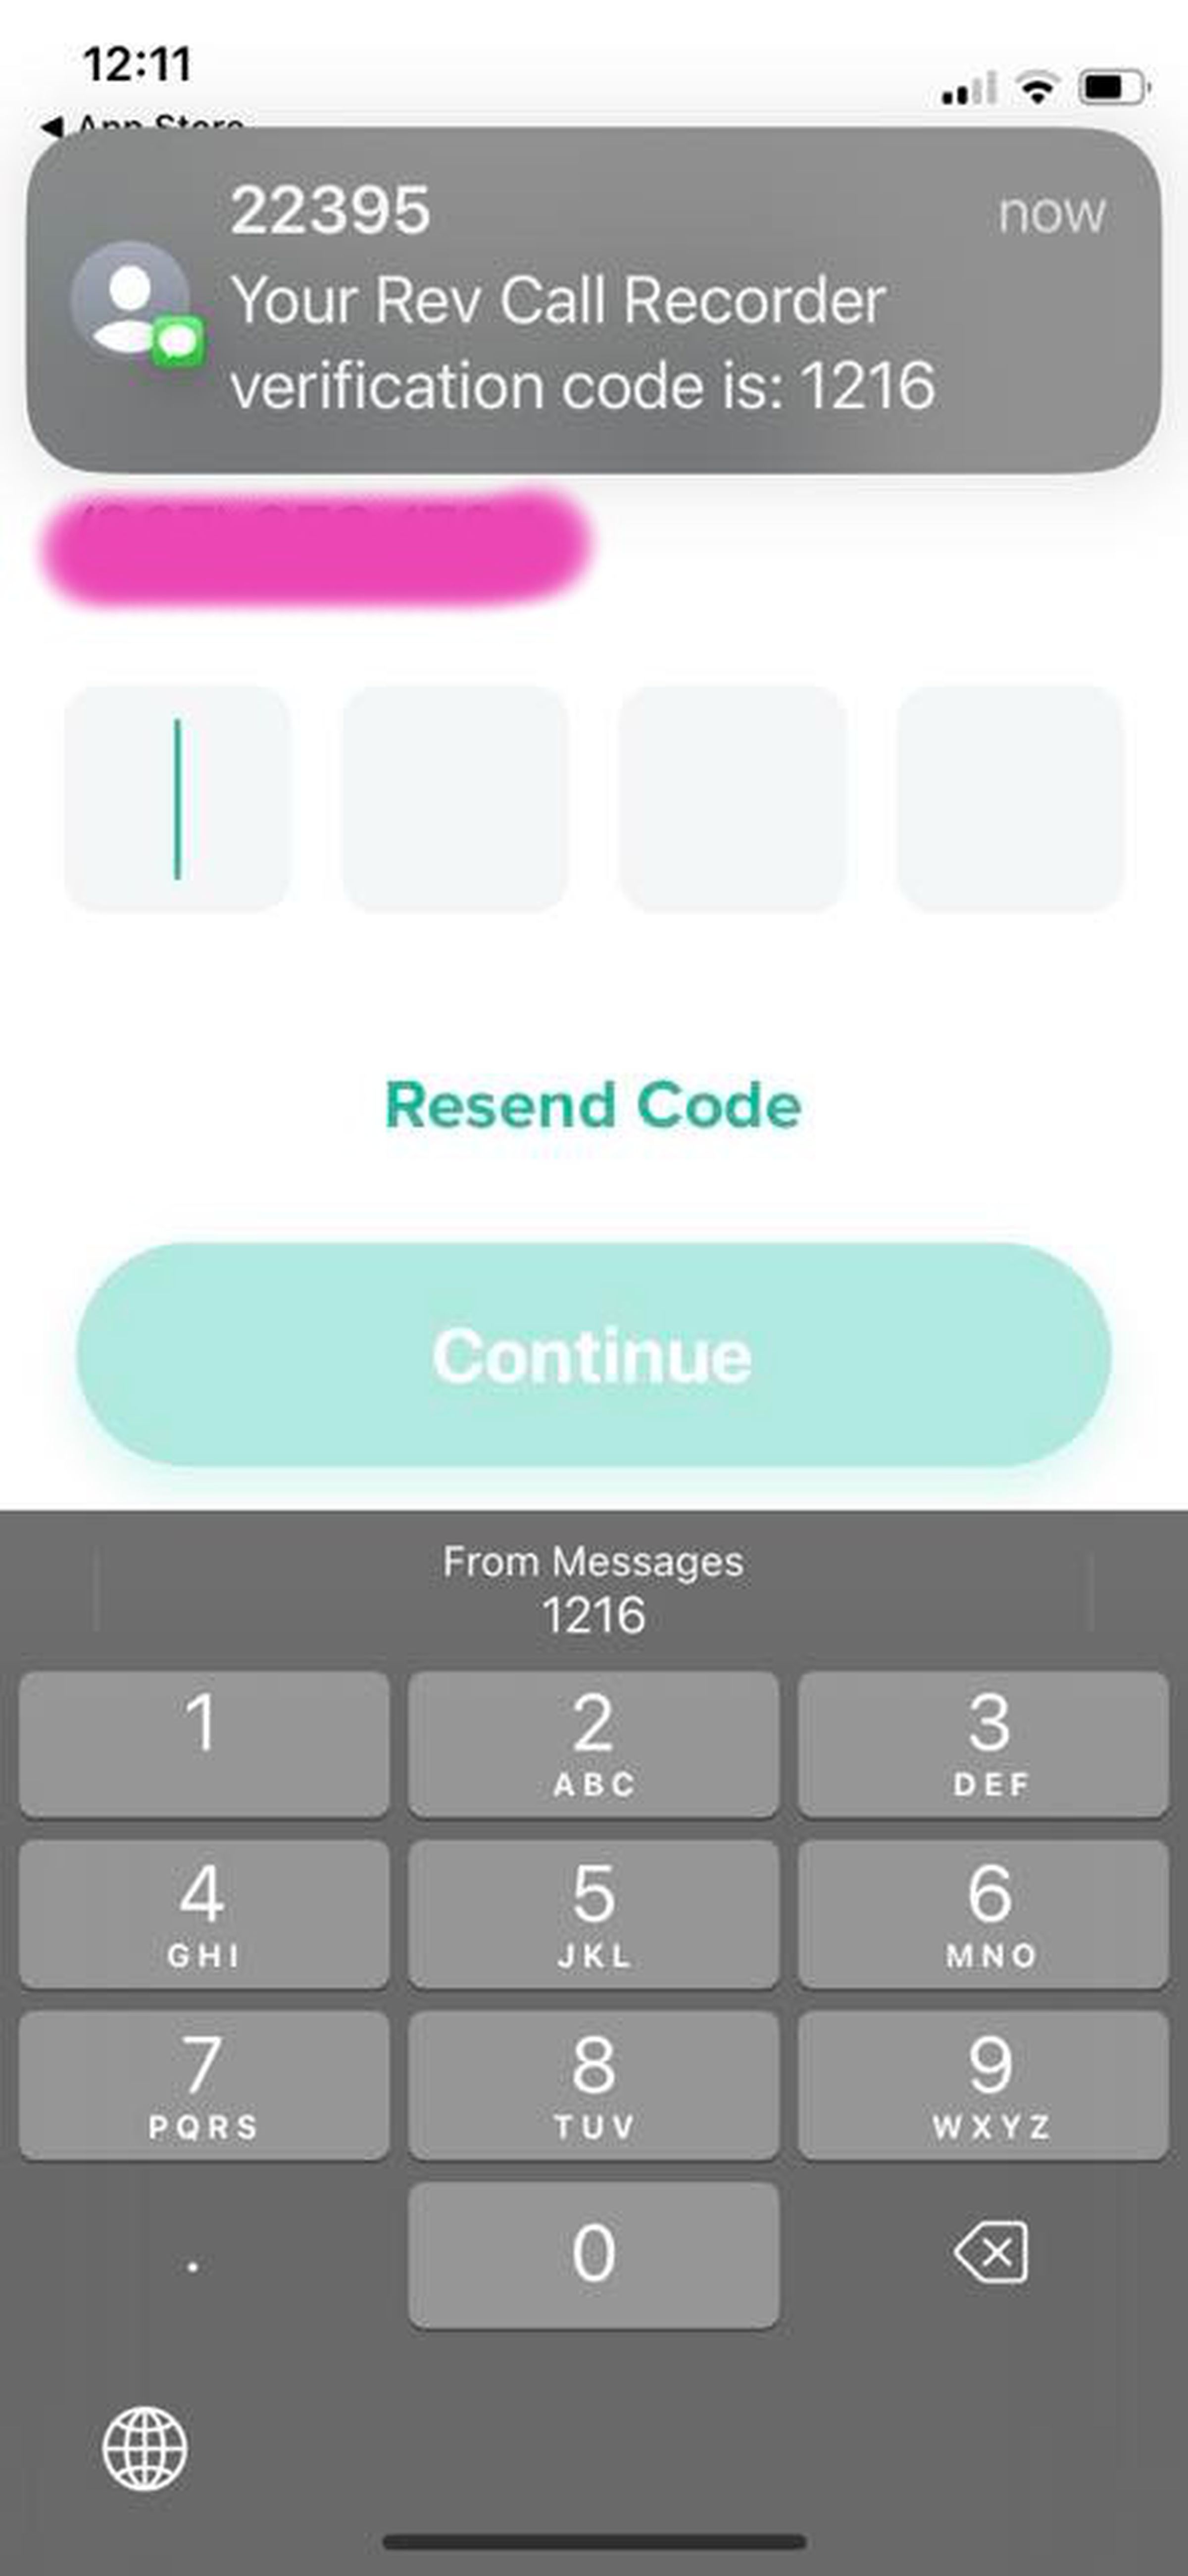 Rev Call Recorder app menu asking you to verify your number with the provided code they texted.